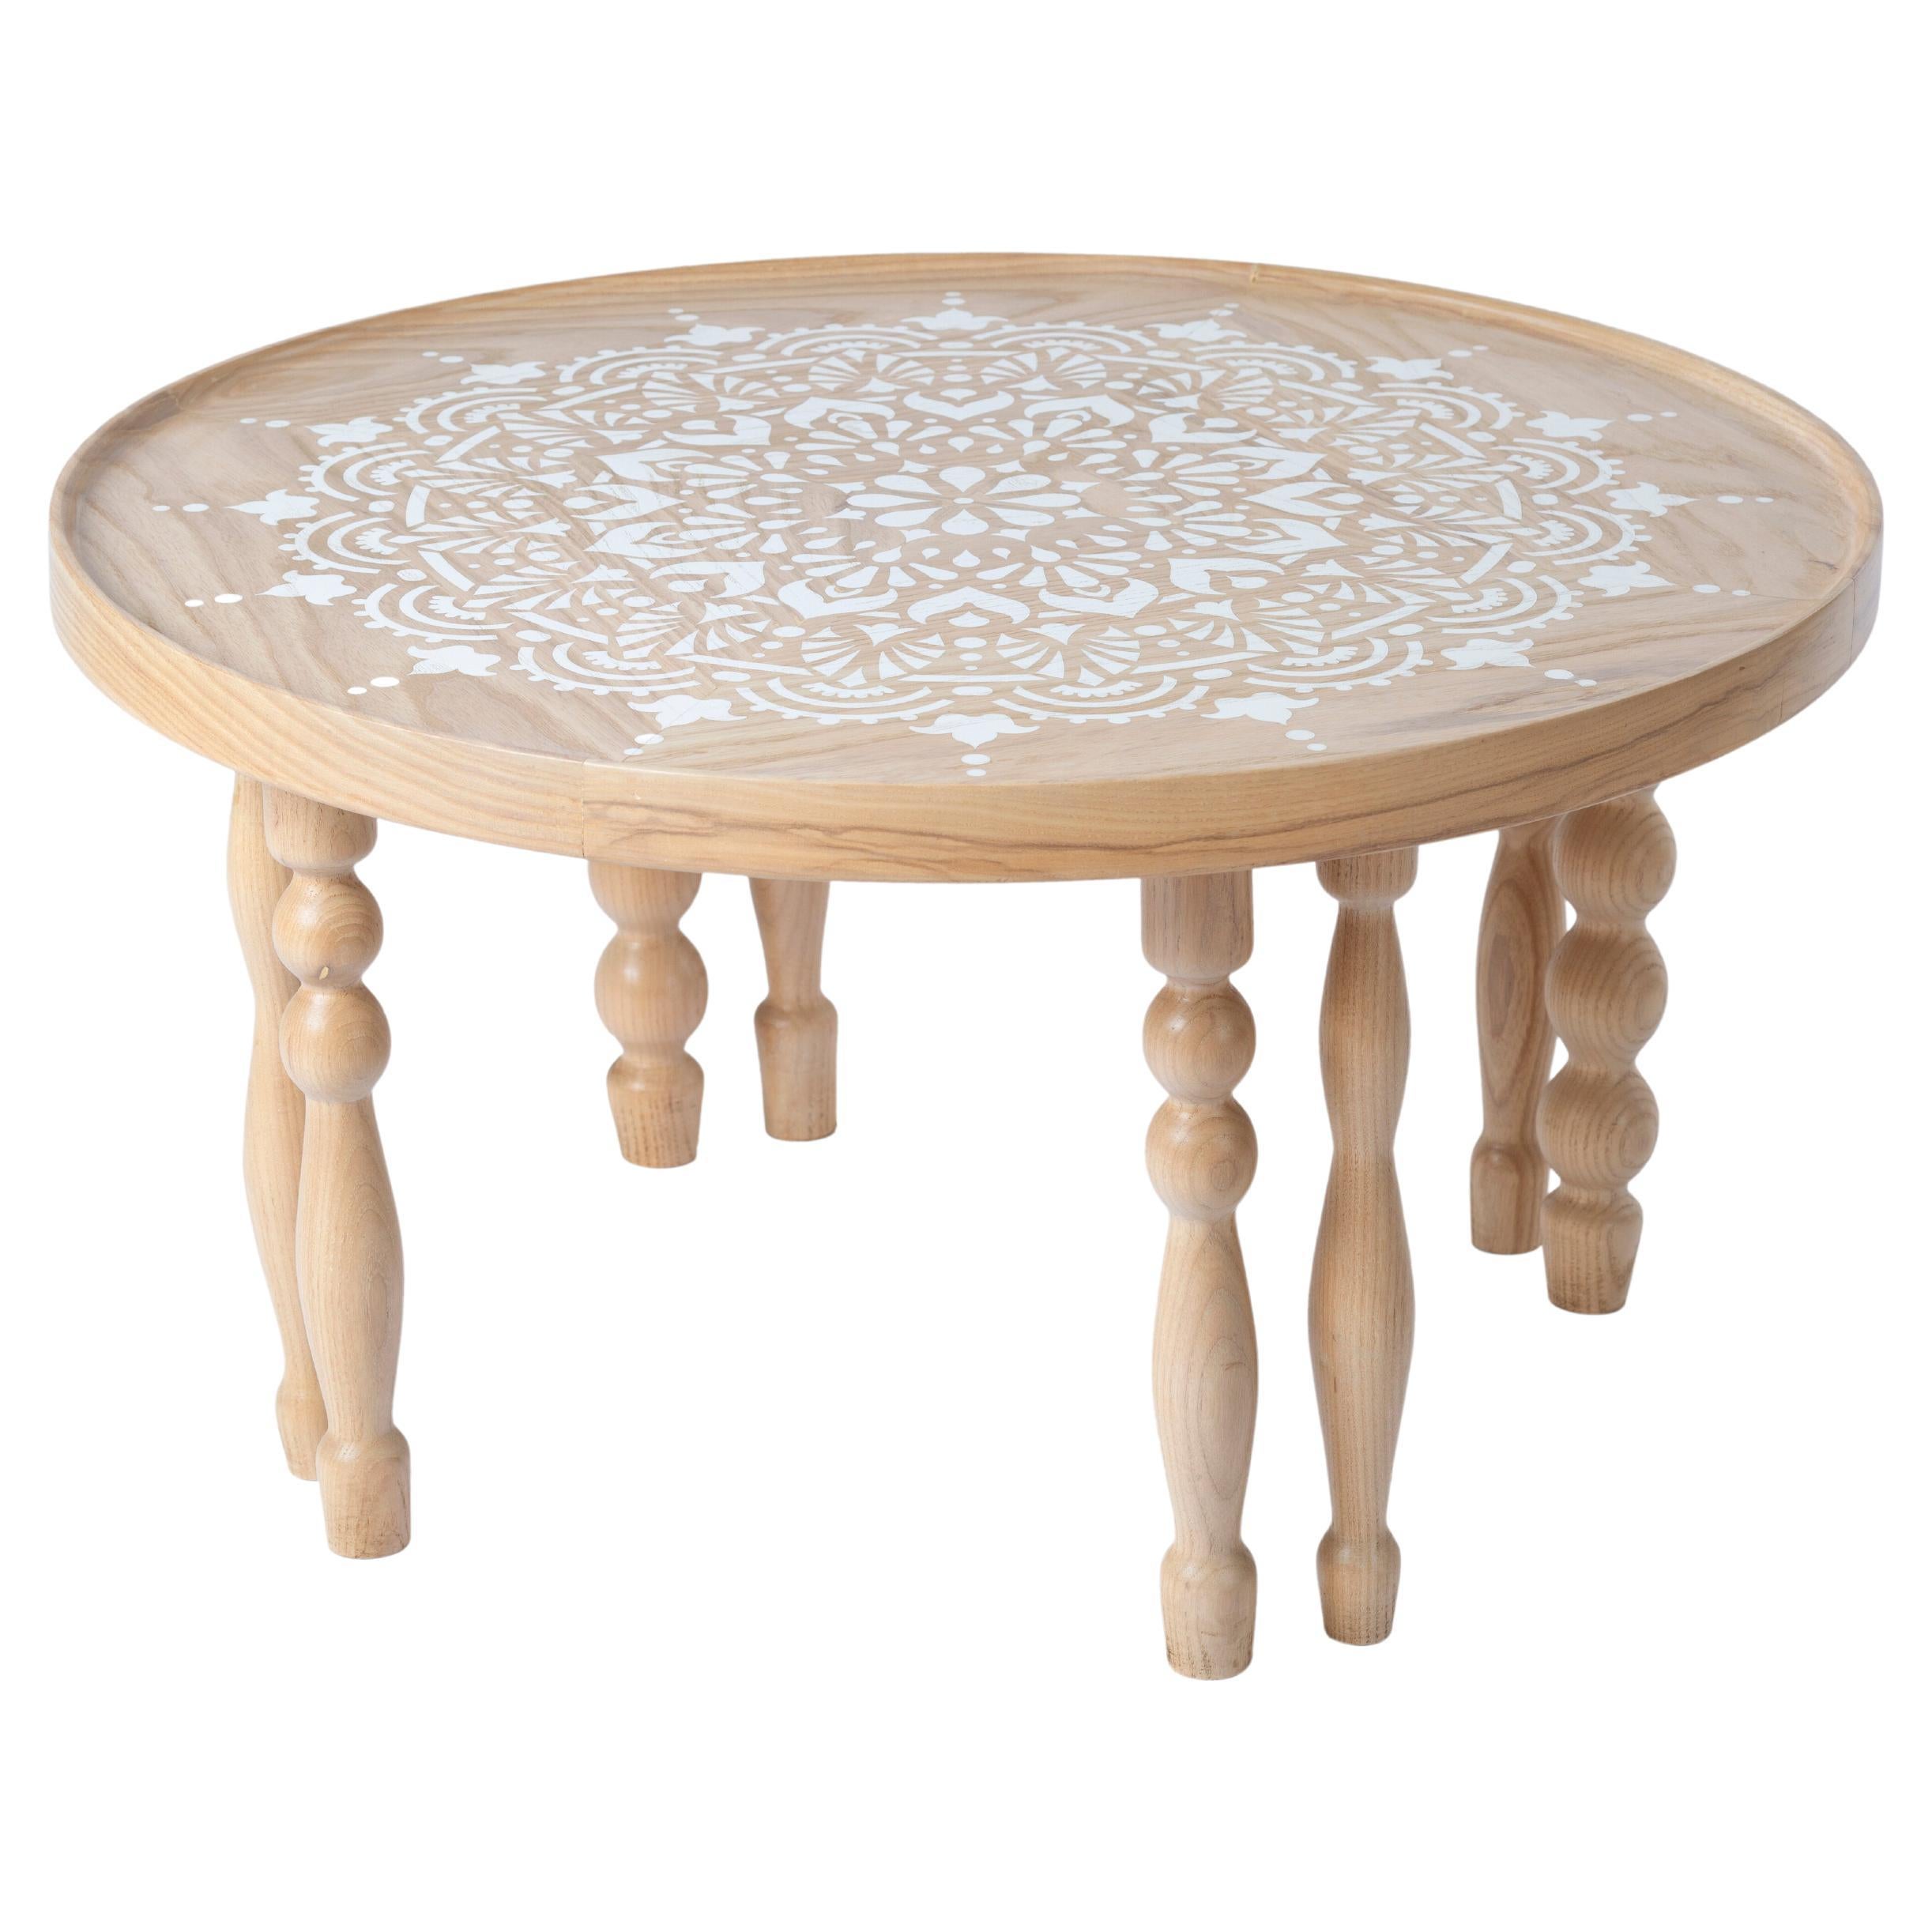 Ash Wood Coffee Table with Arabesque-Inspired Legs & Stenciled Mandala Motif For Sale